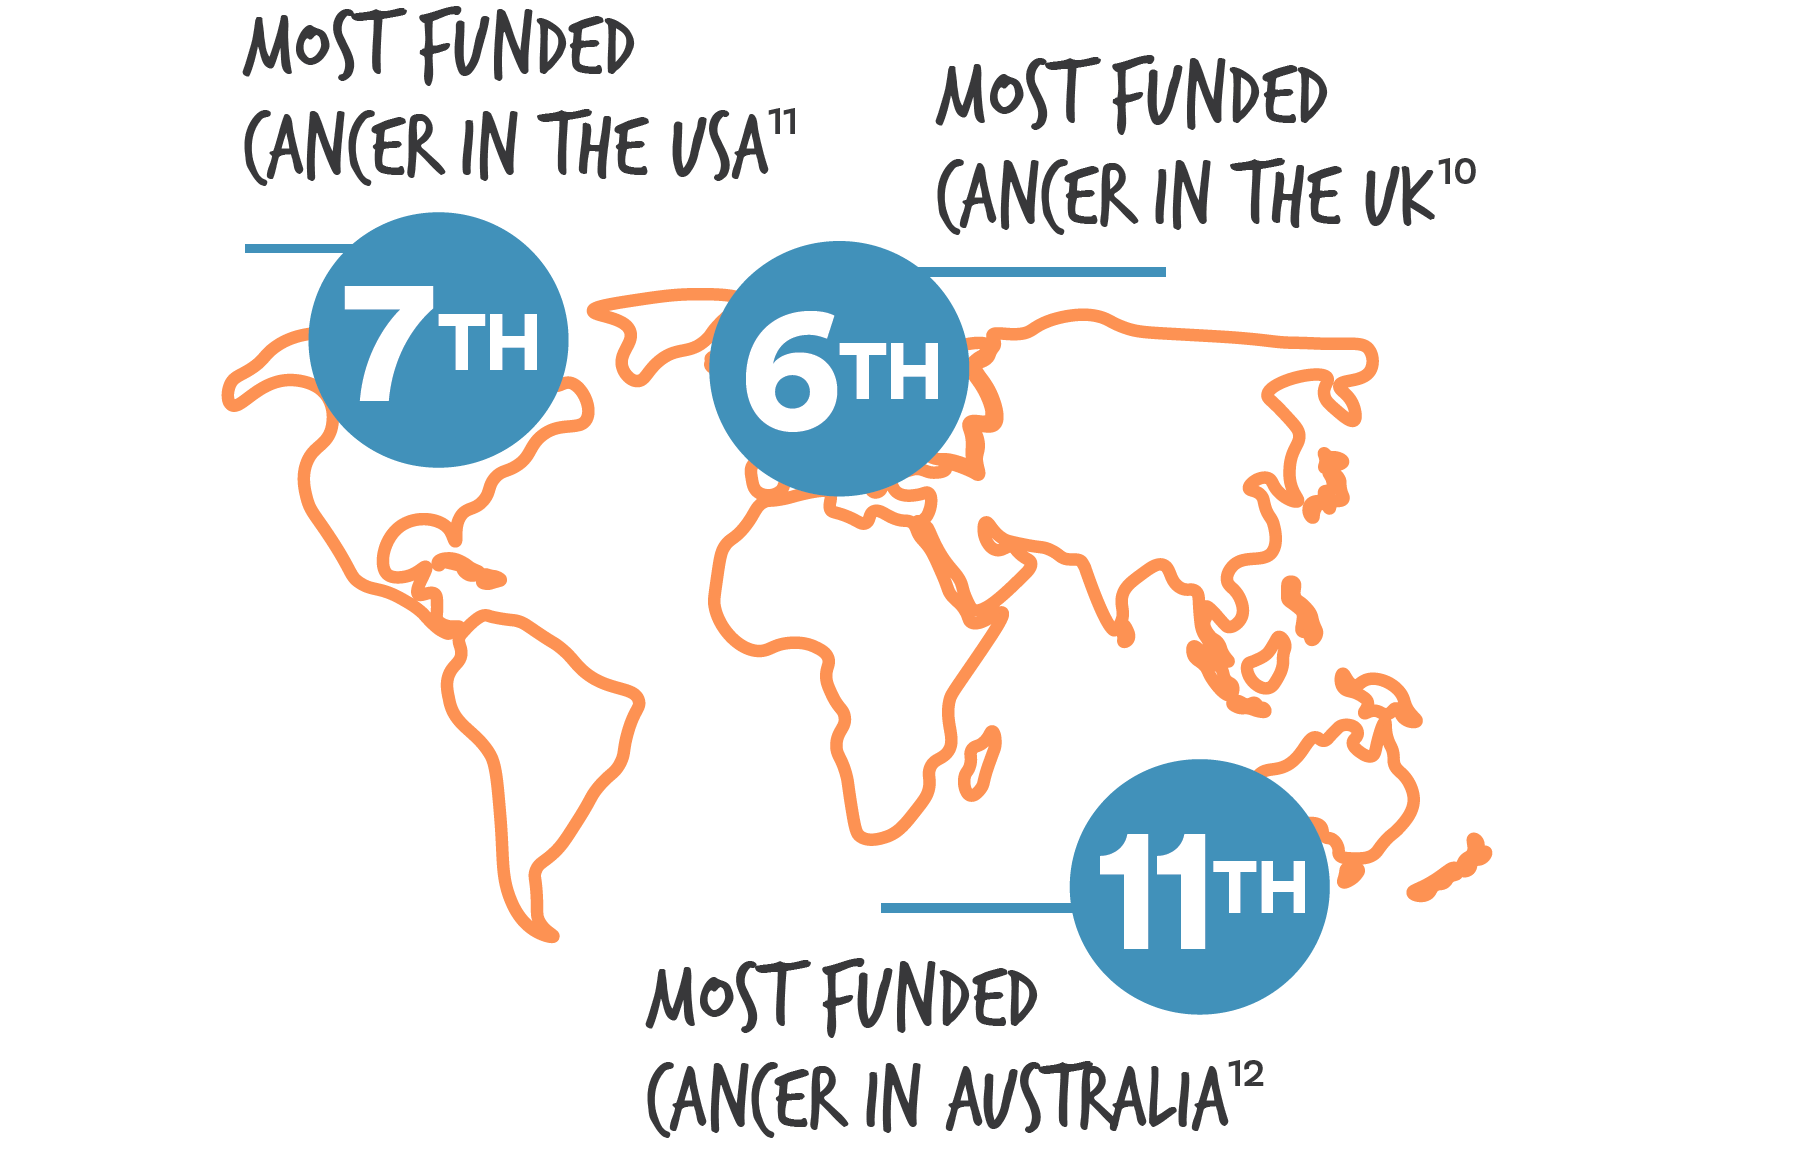 image of "Most Funded Cancer in USA, UK and Australia"